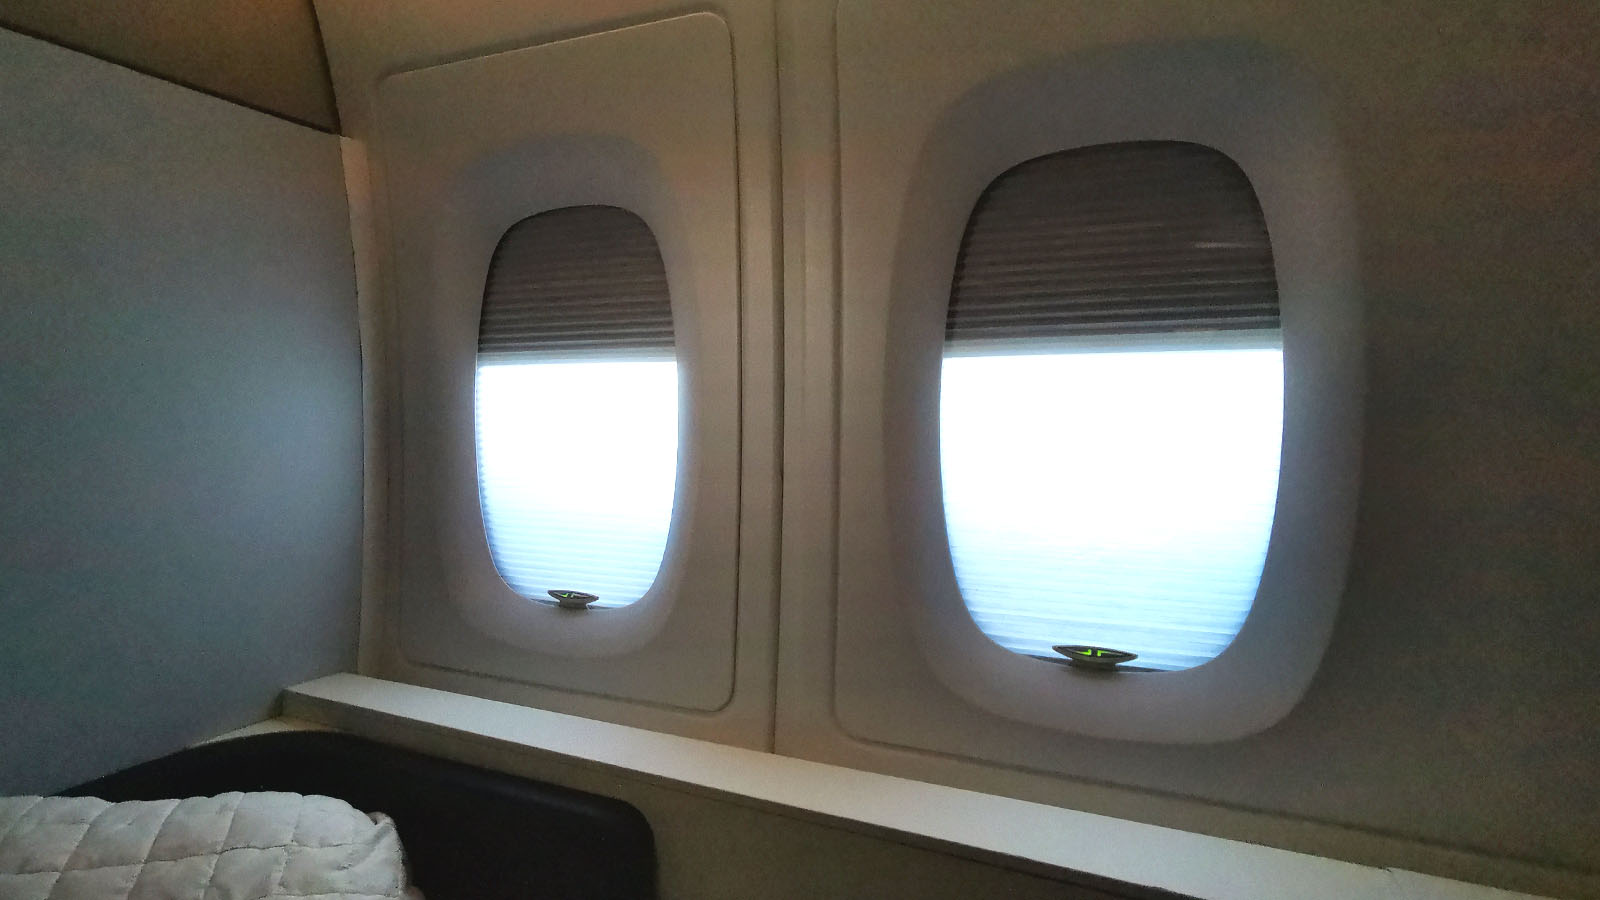 Control the window blinds in Qantas Airbus A380 First